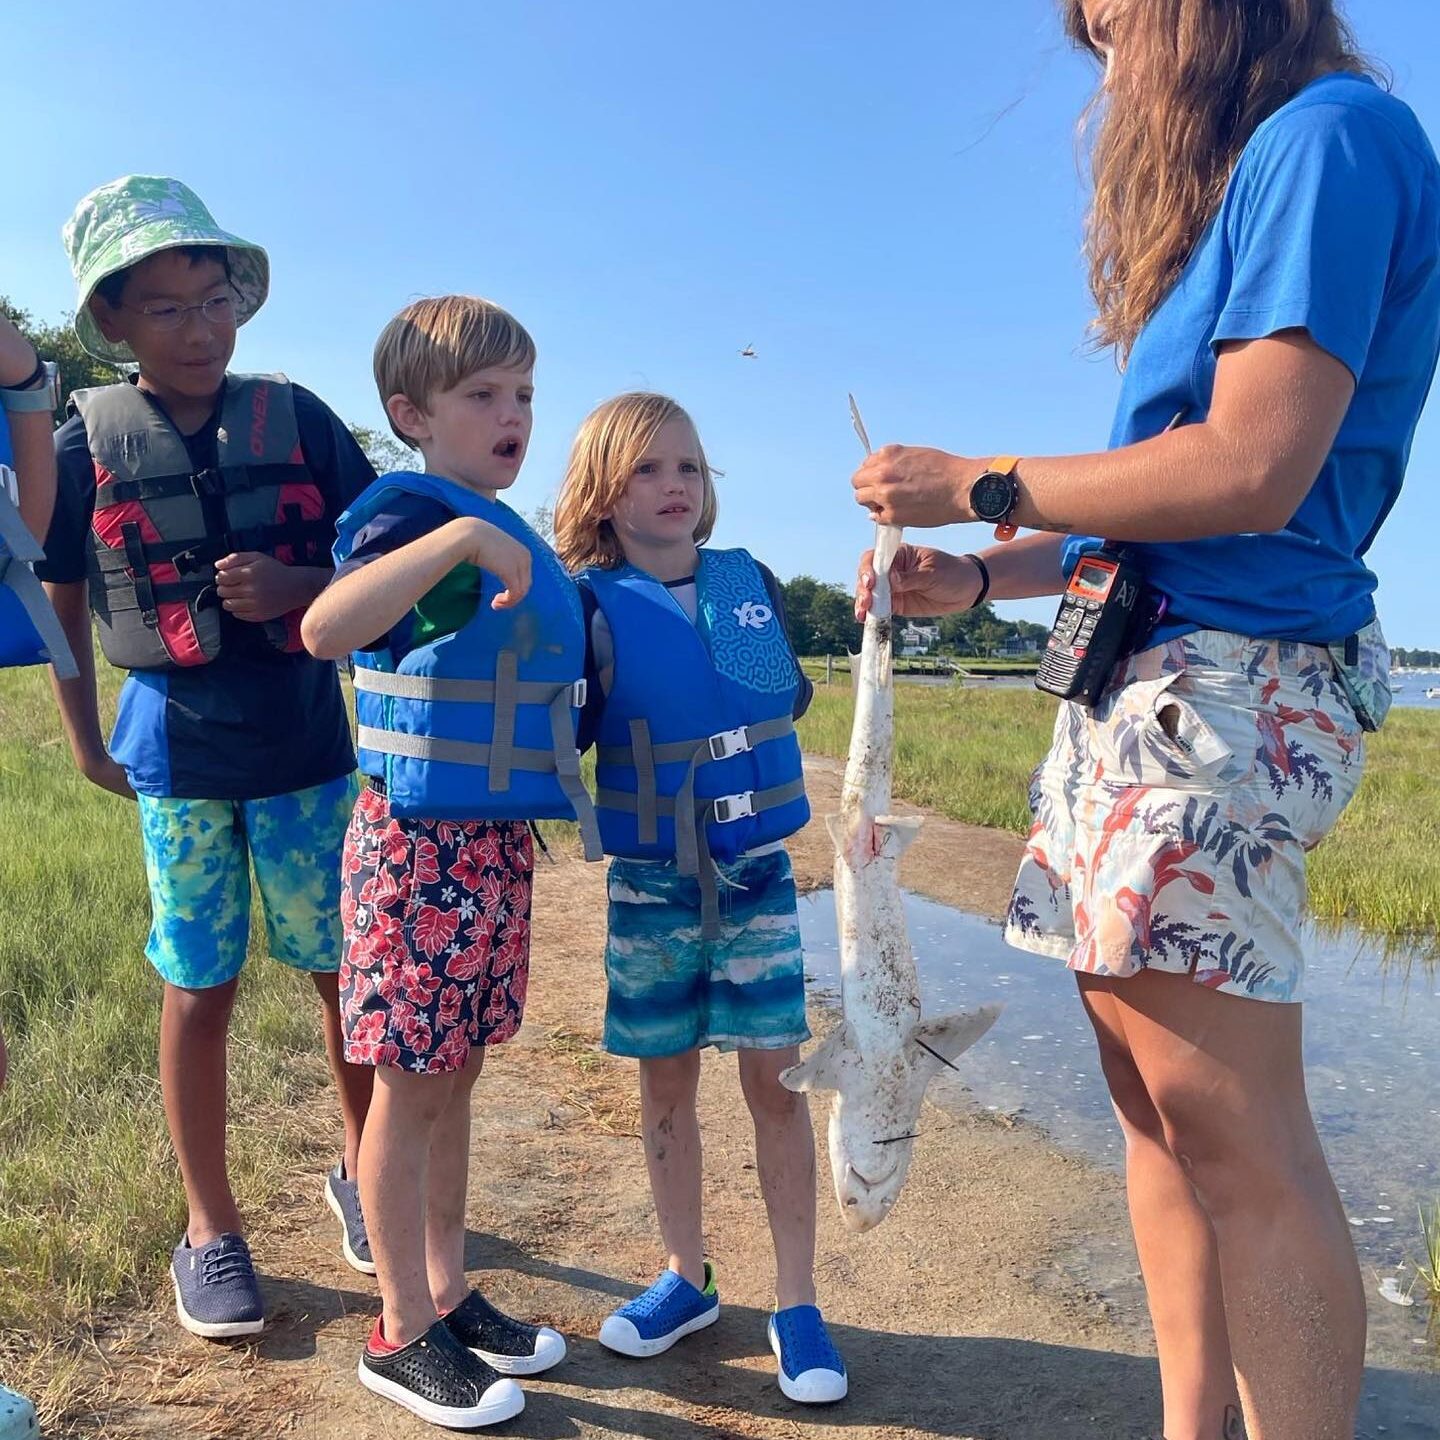 Marine Science_Bre with kids on shore363397961_864698105165279_5239537444142363468_n